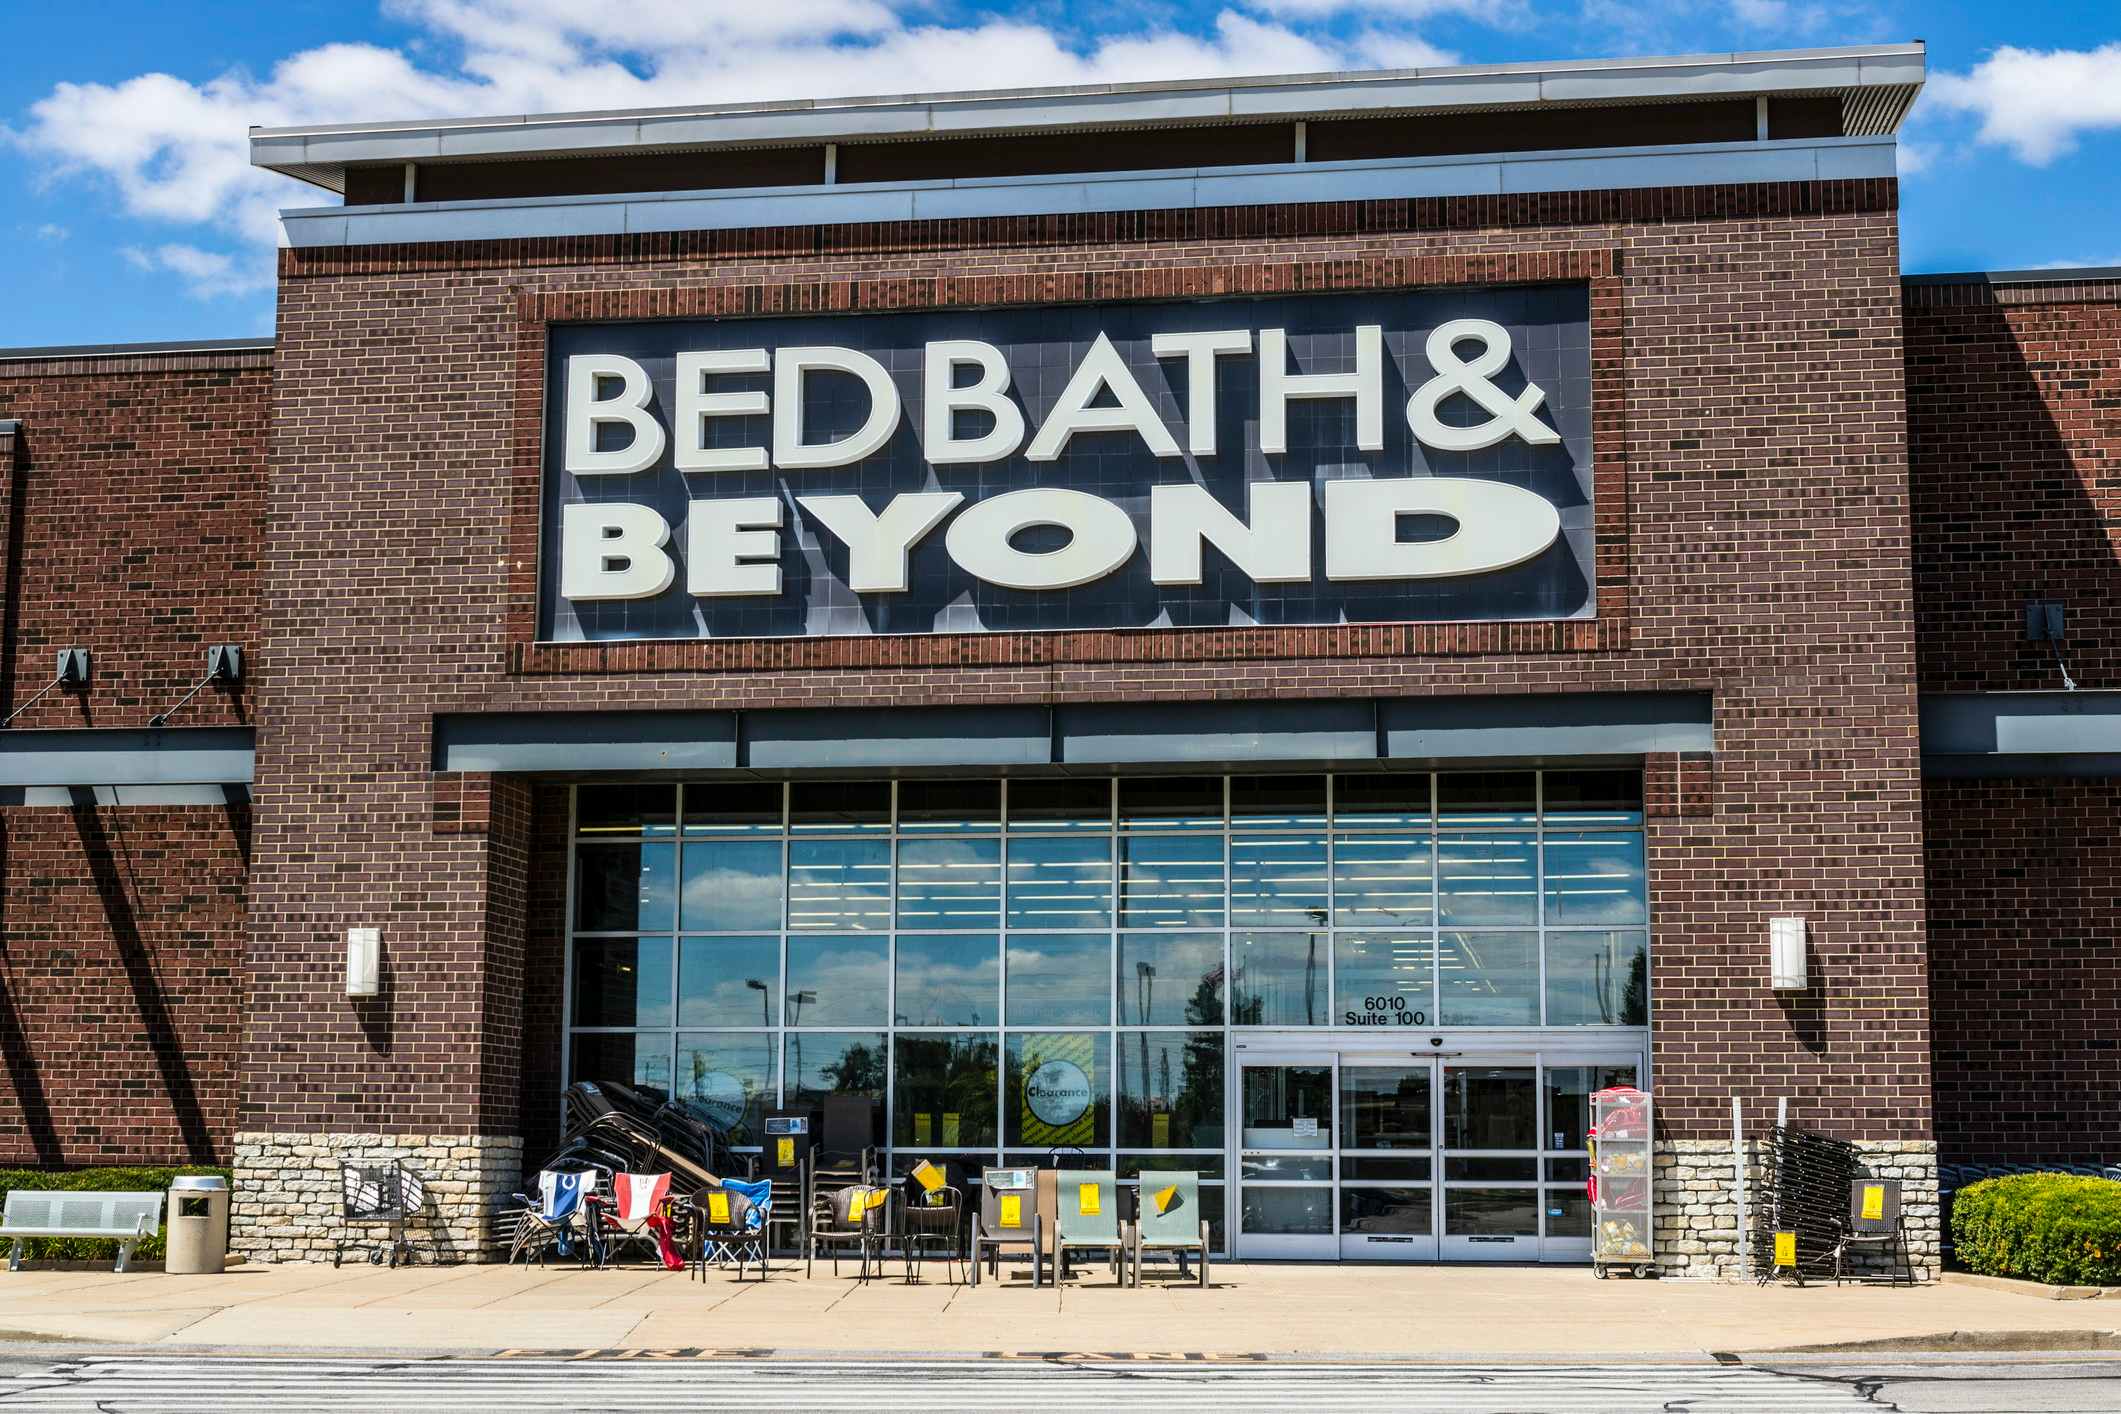 Indianapolis Bed Bath & Beyond Retail Location.